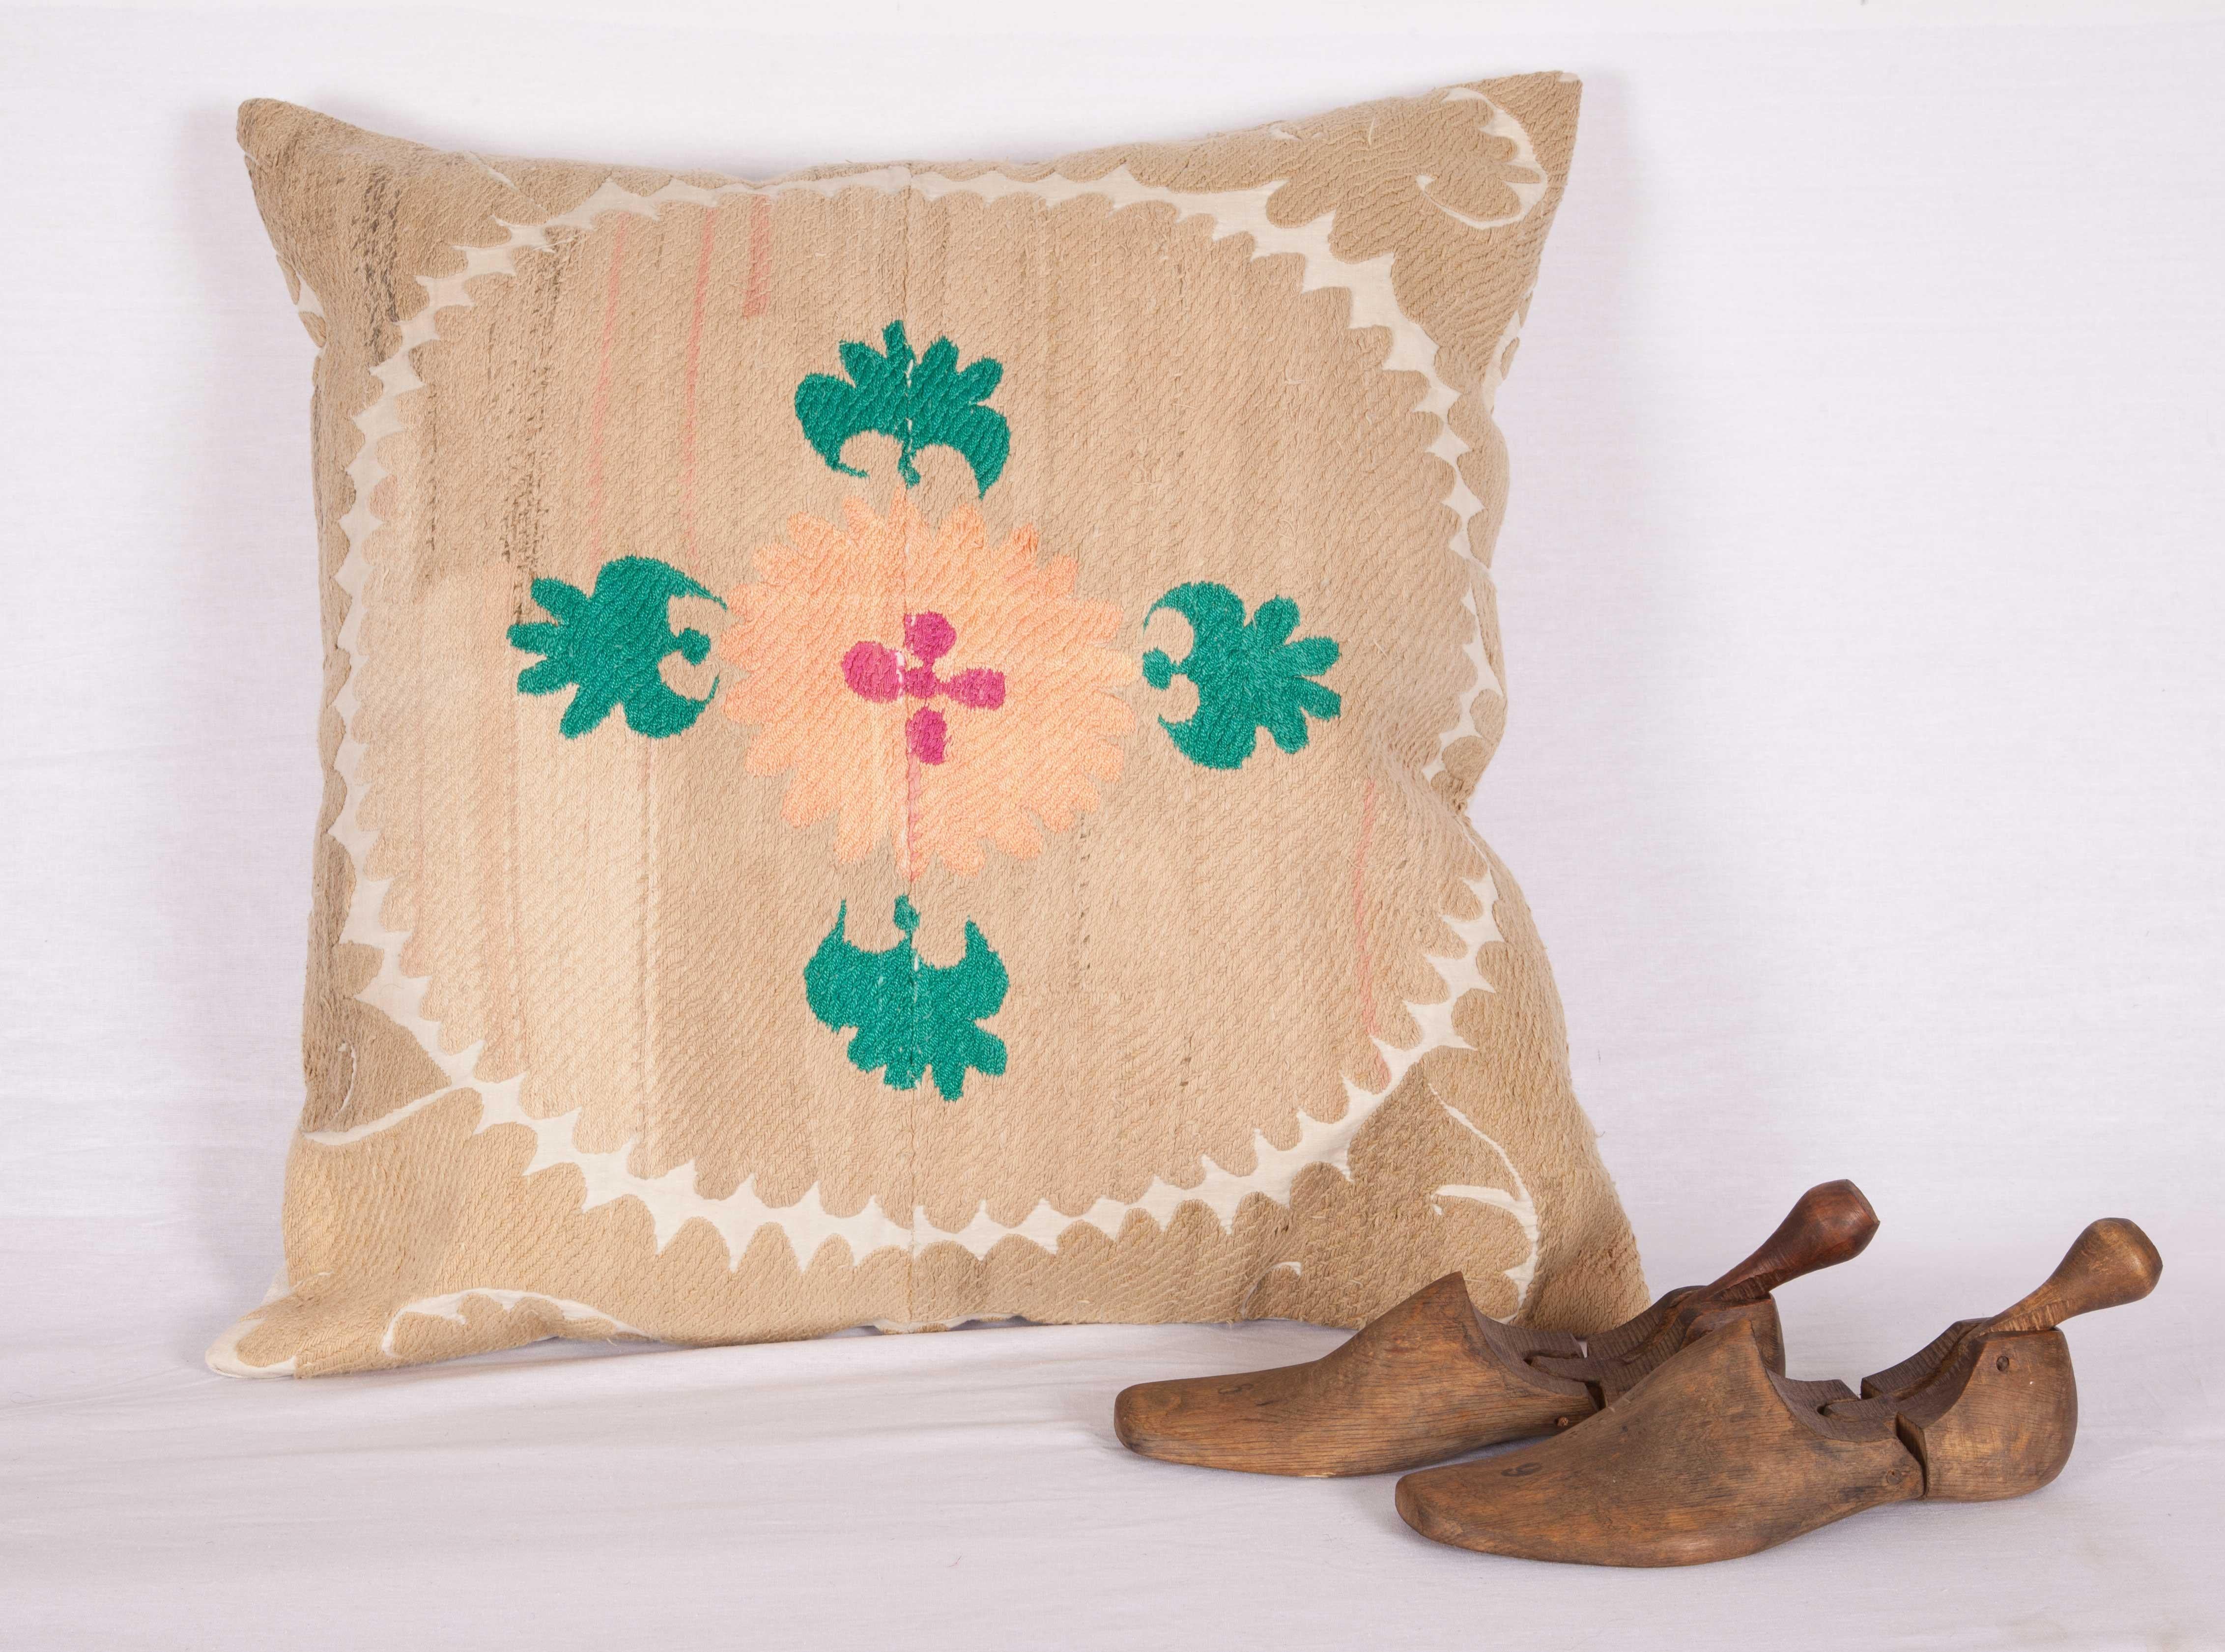 Cotton Pillow Case Made from a Mid-20th Century Suzani from Amarkand Uzbekistan